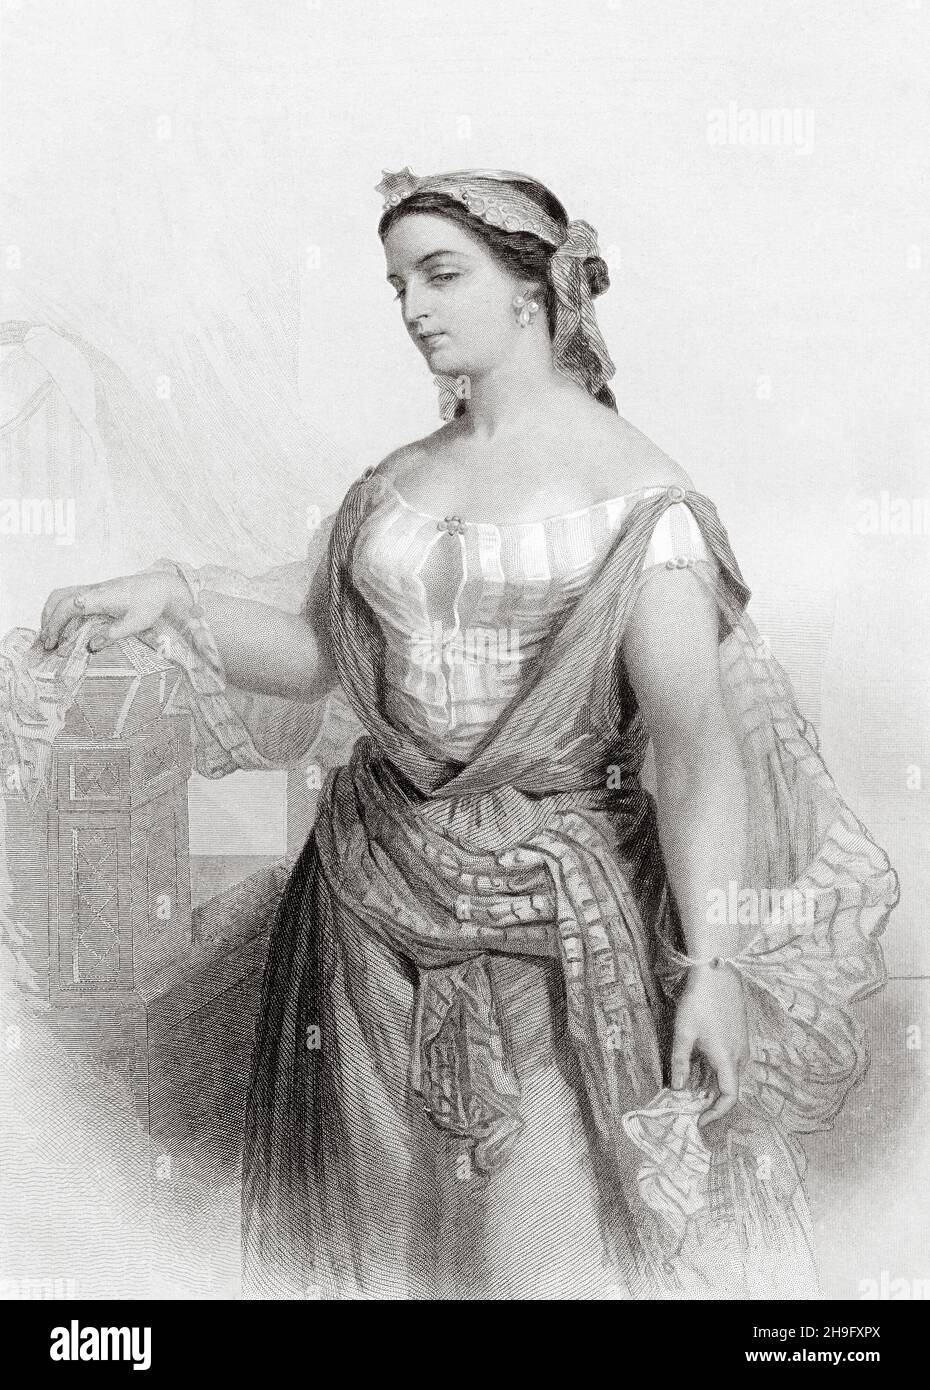 Esther (born Hadassah) was a woman in the Hebrew Bible, the queen of Ahasuerus and the heroine of the Biblical Book of Esther. Old 19th century engraved illustration from Mugeres de la Biblia by Joaquin Roca y Cornet 1862 Stock Photo